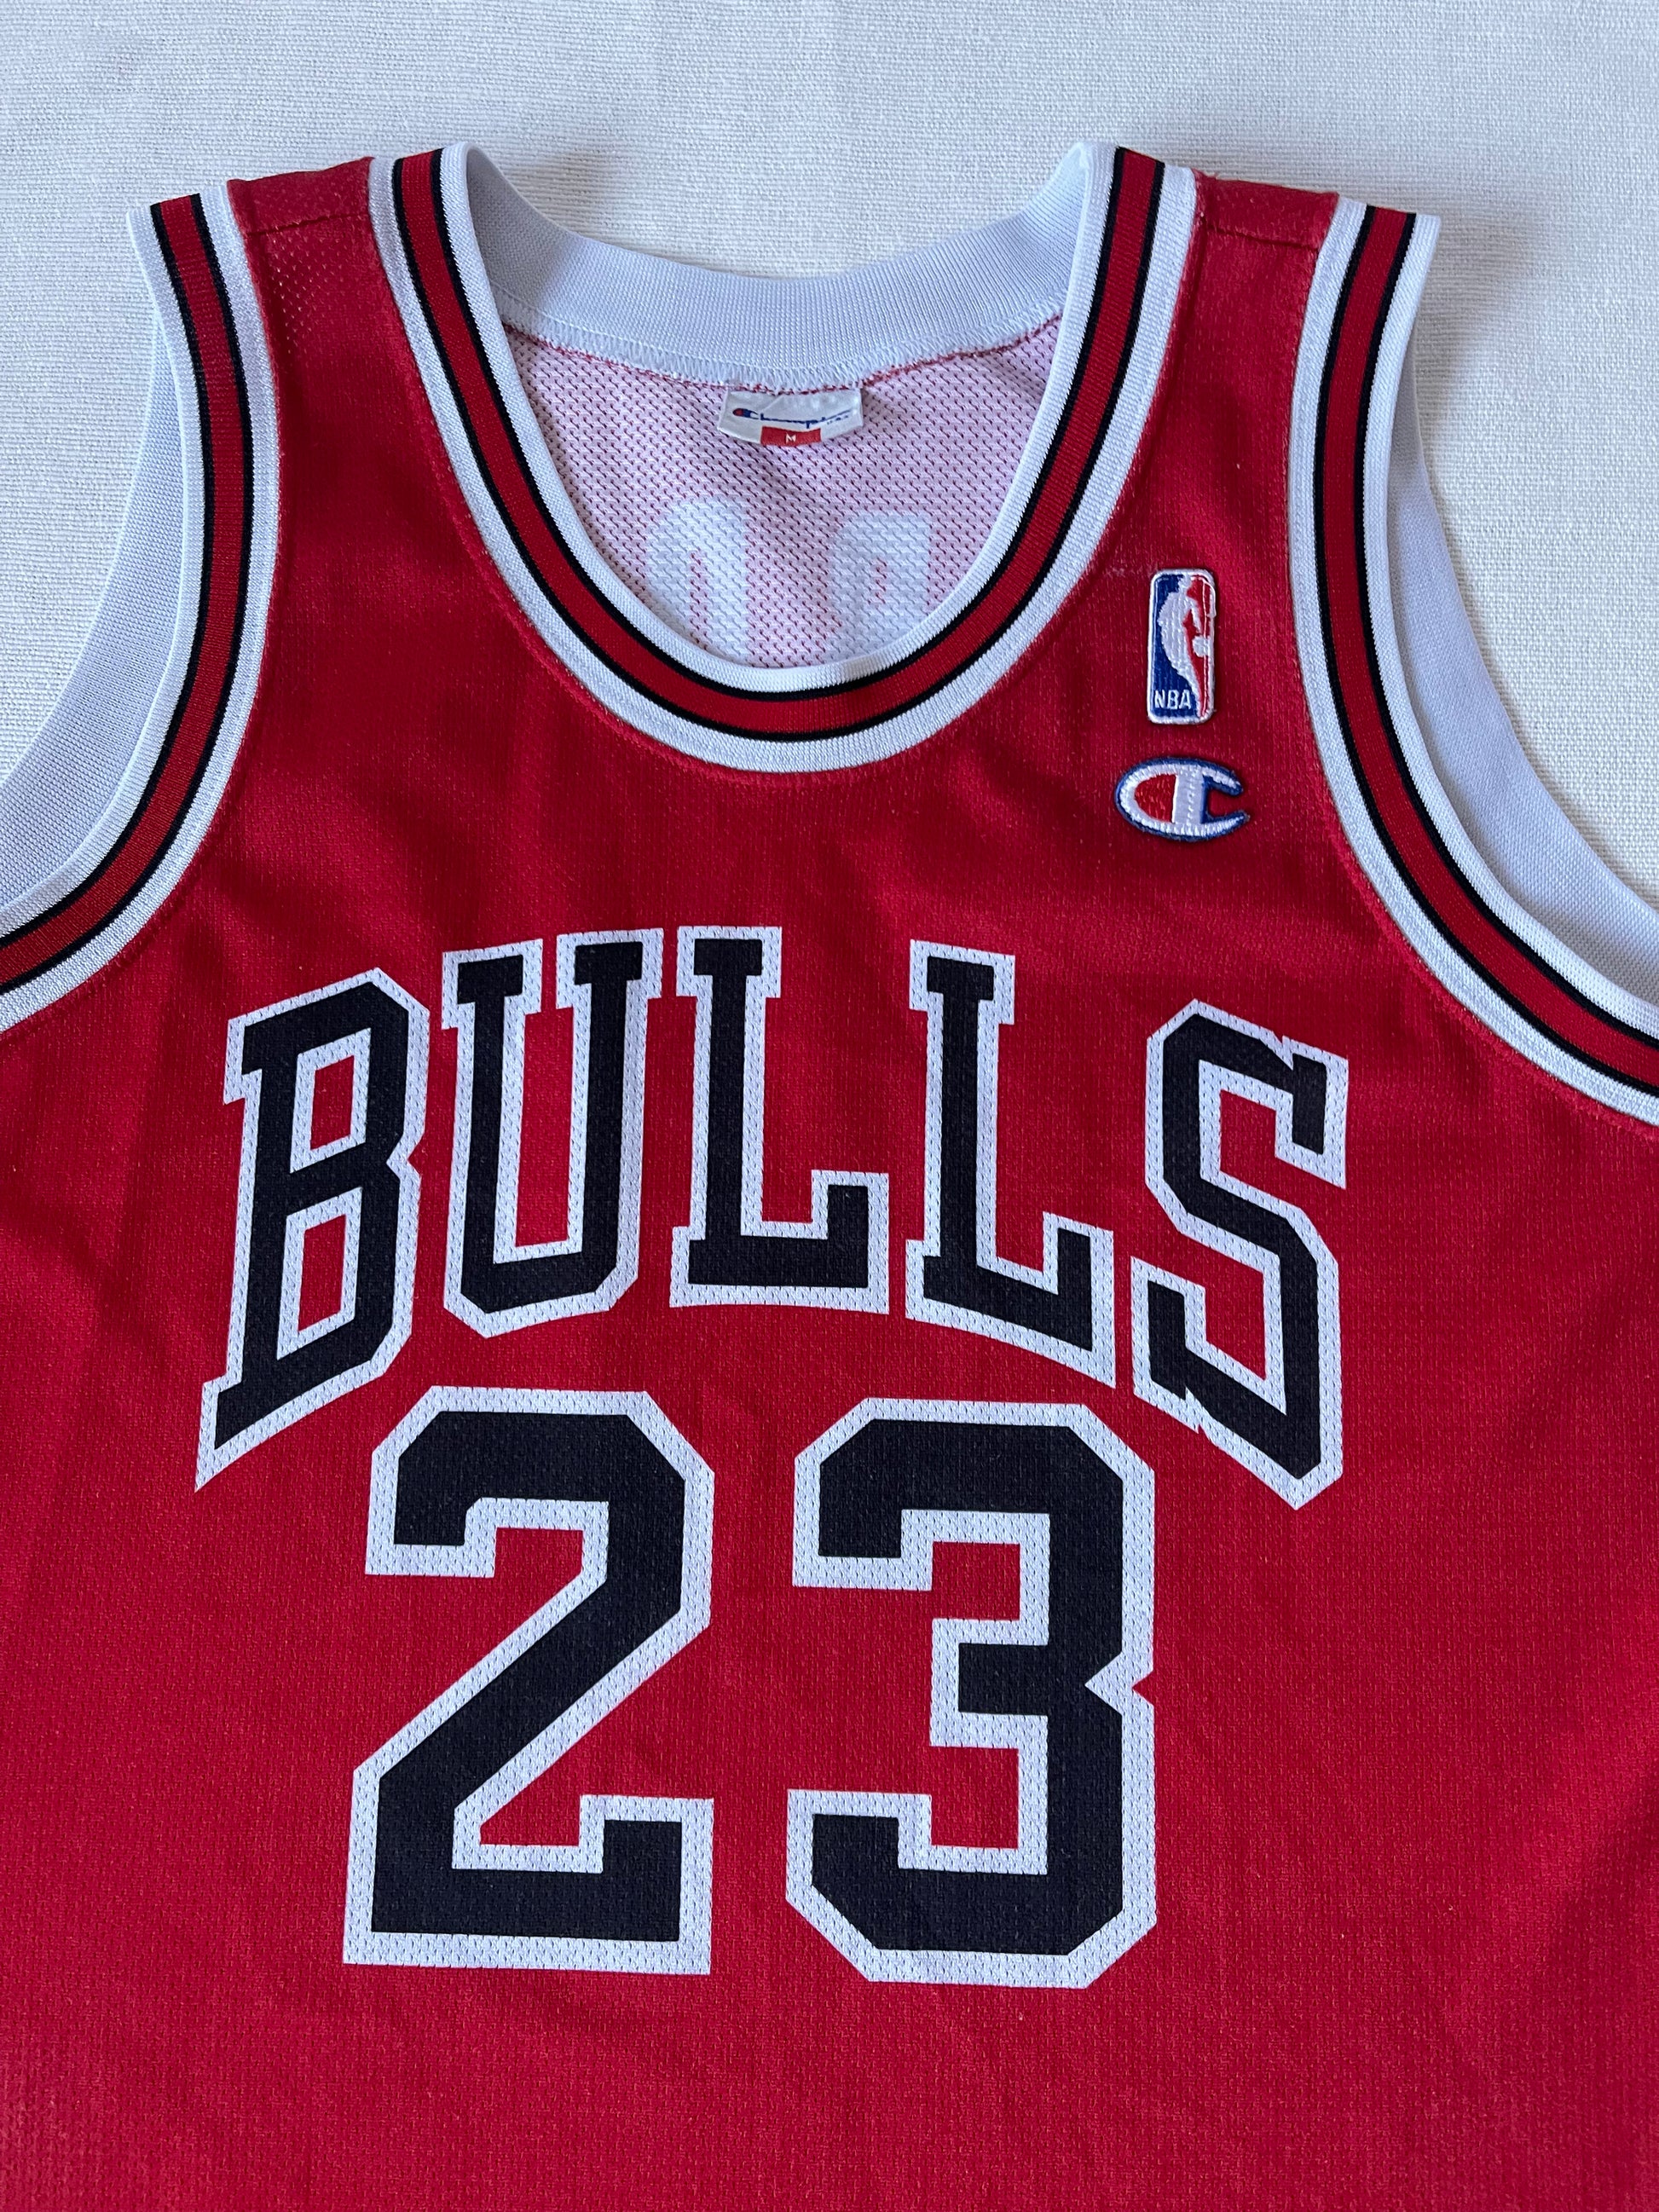 Vintage 90's Michael Jordan Chicago Bulls Champion No 23 Jersey Red Size M Made in Italy